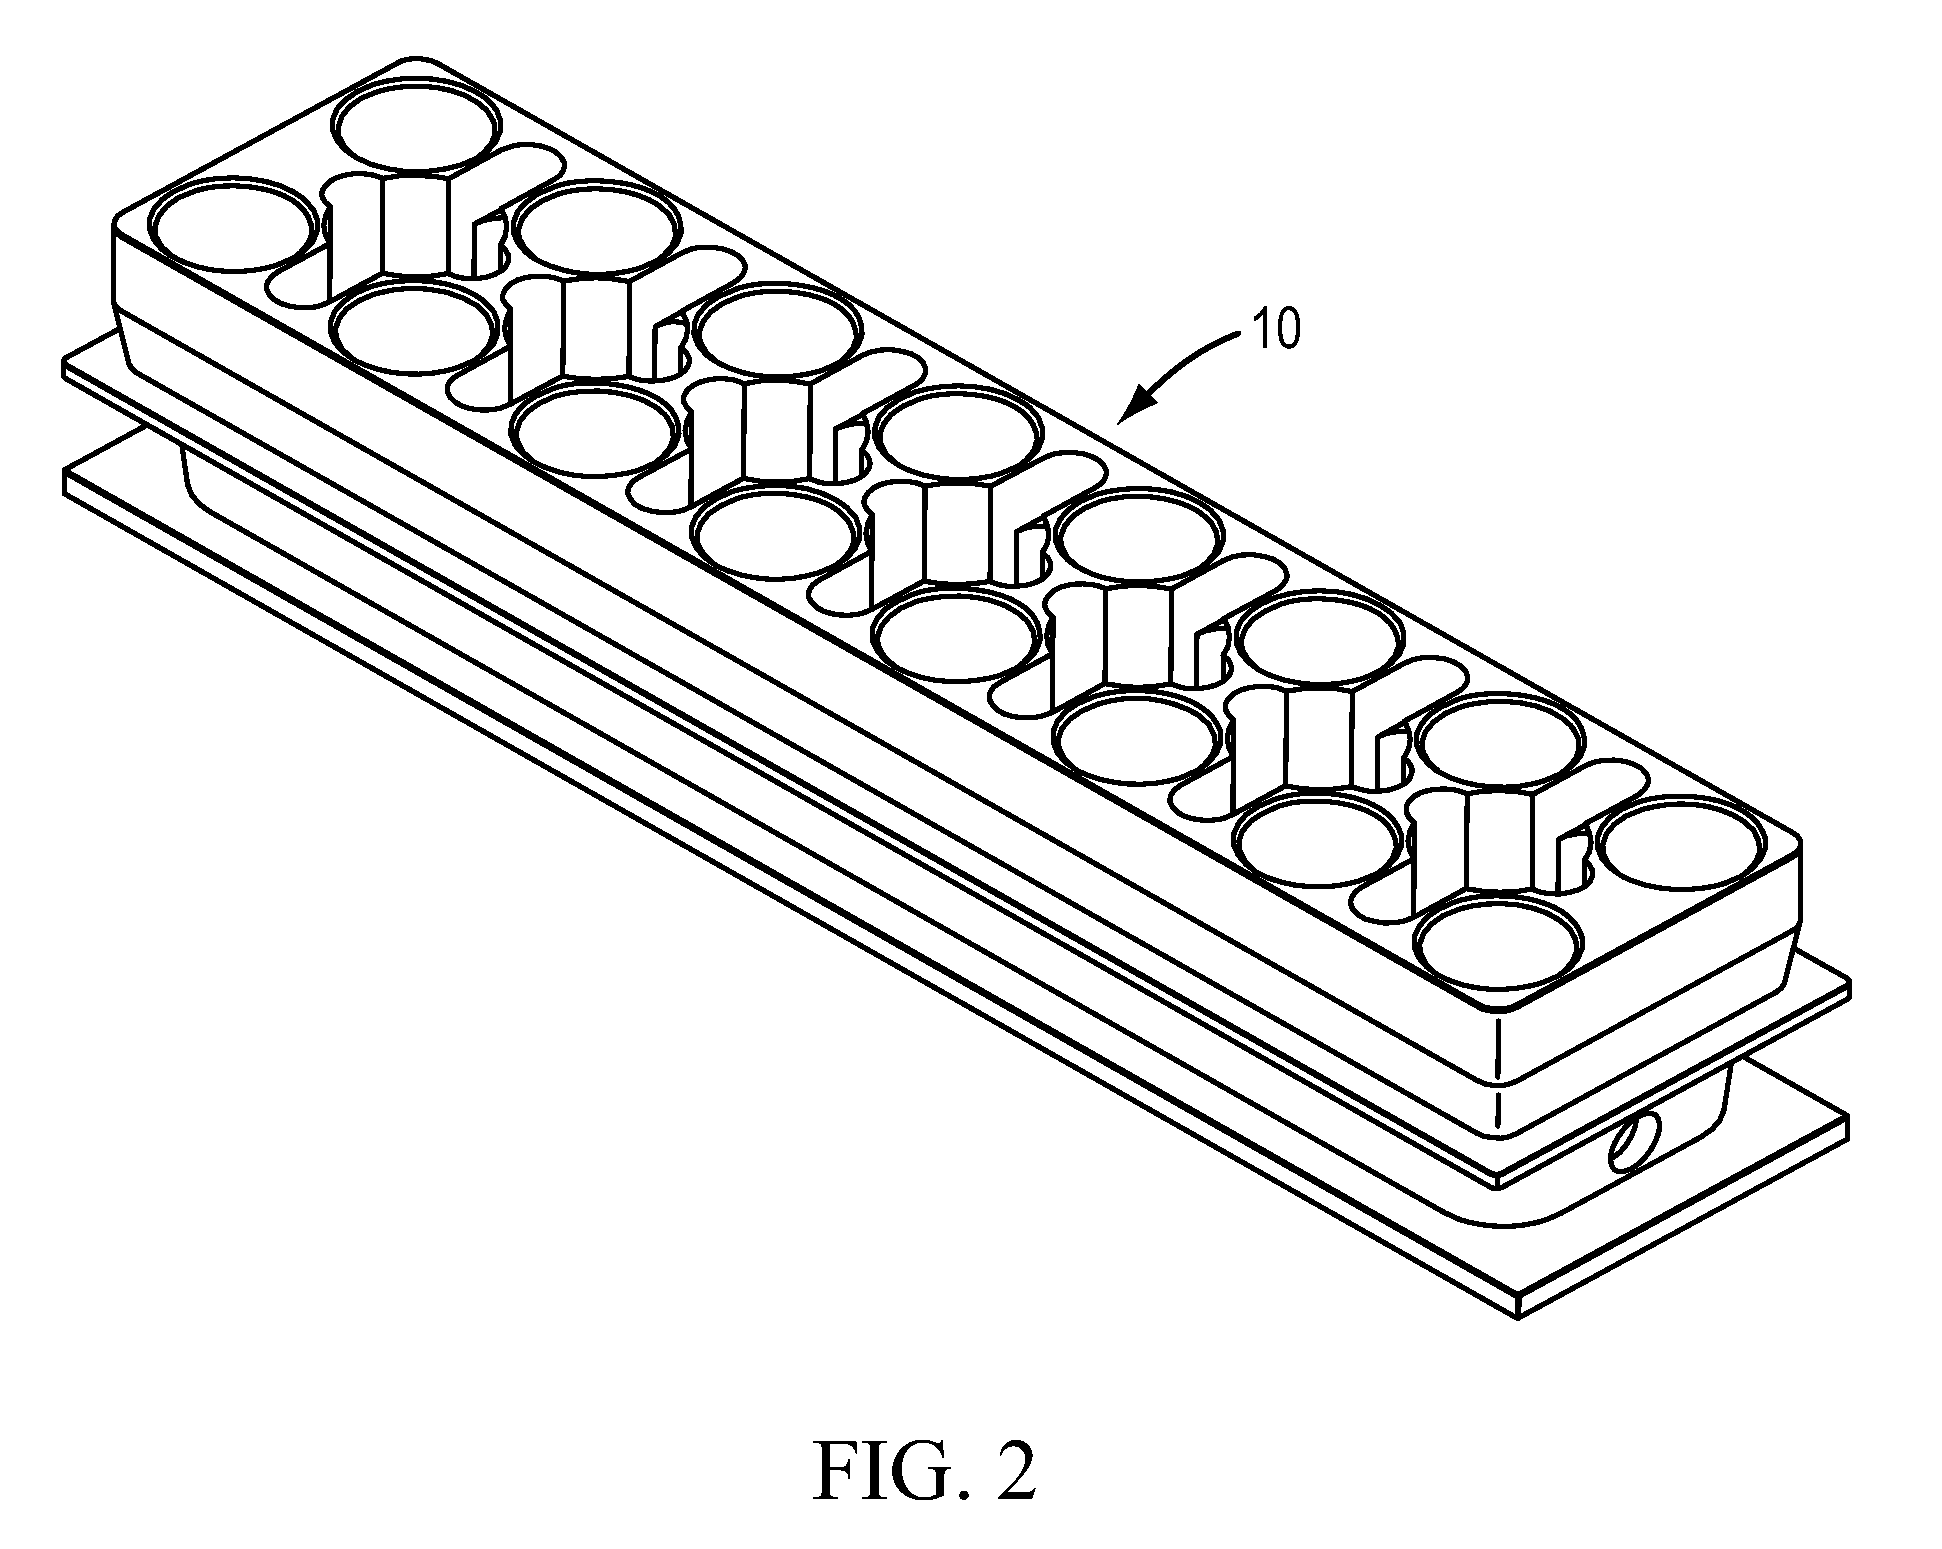 Apparatus and Method for Segmented Thermal Cycler